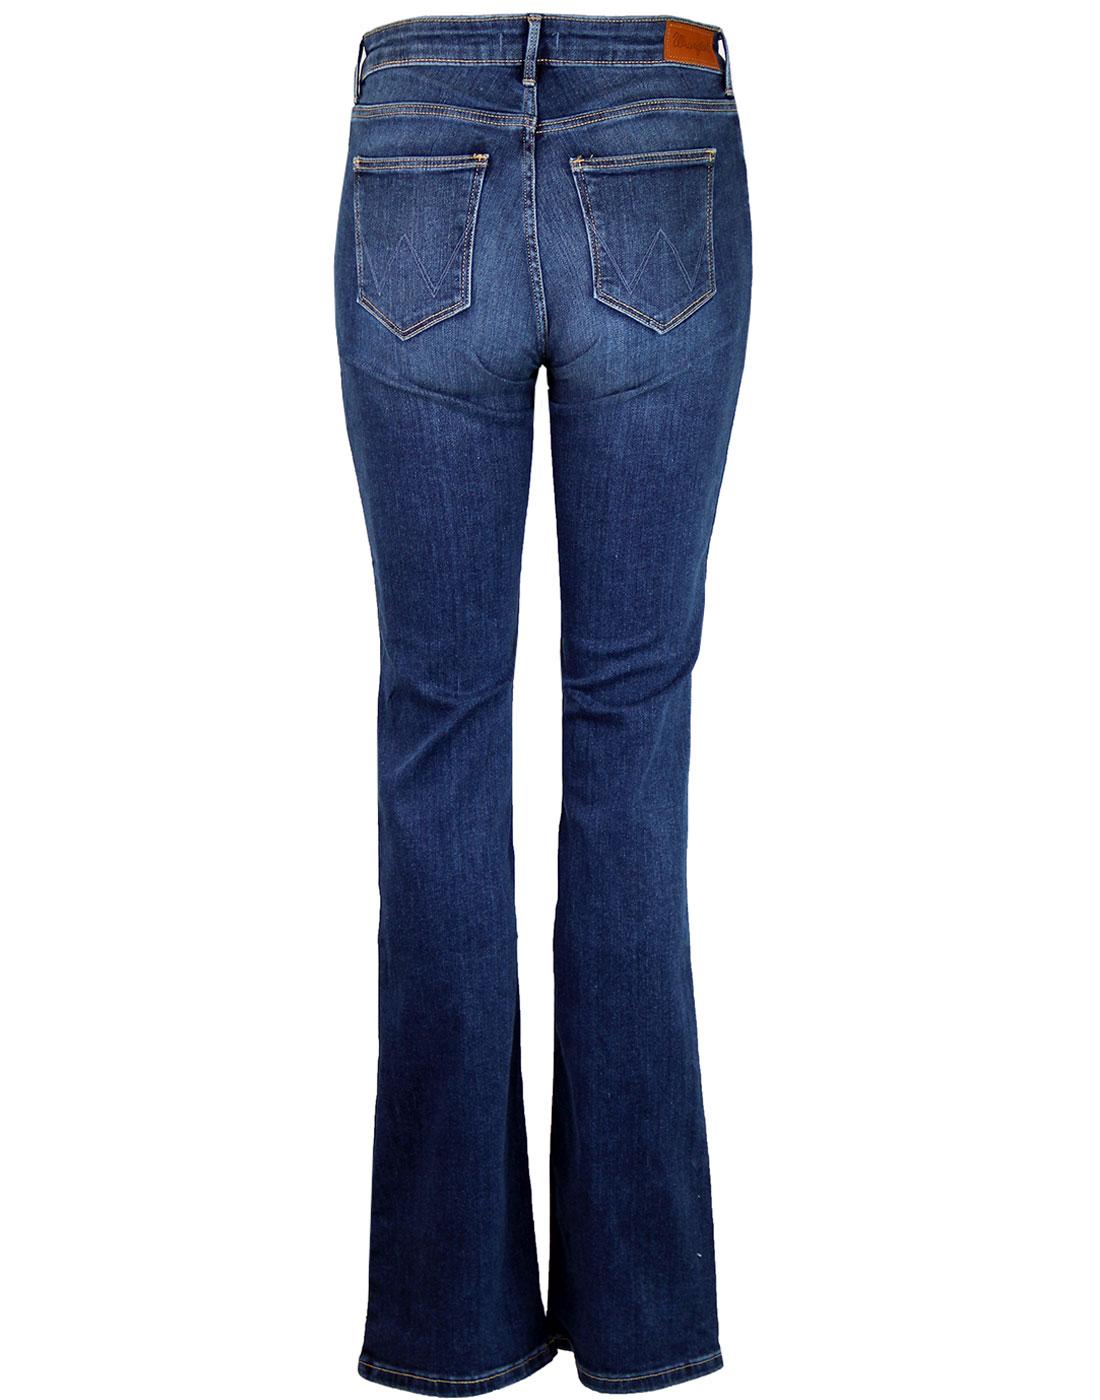 WRANGLER Women's 1970's Bootcut Jeans in Authentic Blue